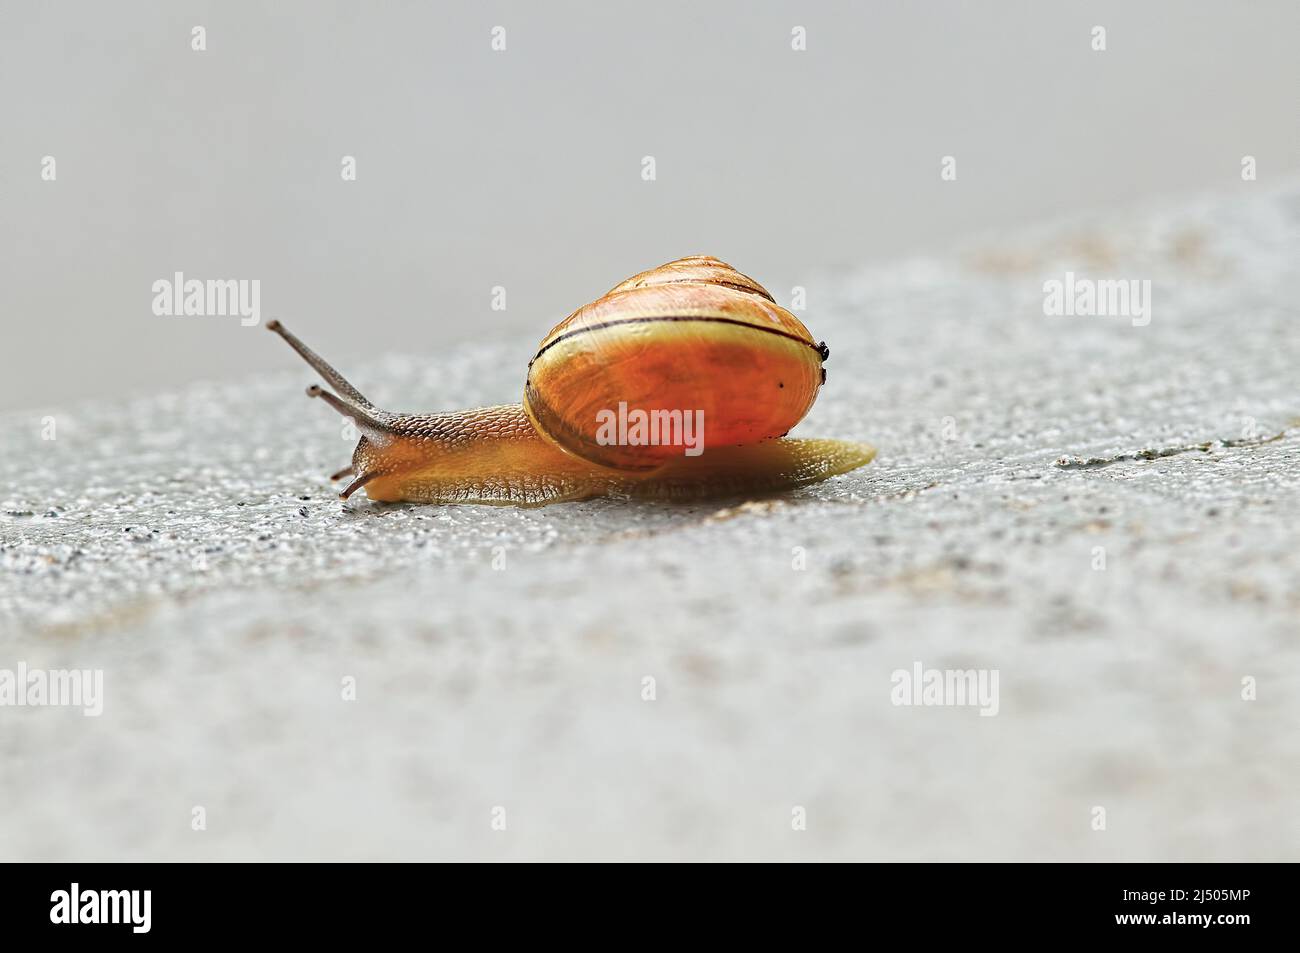 Grove snail or Brown-lipped snail (Cepaea nemoralis) stretched out and moving along the ground. British Columbia, Canada. Stock Photo